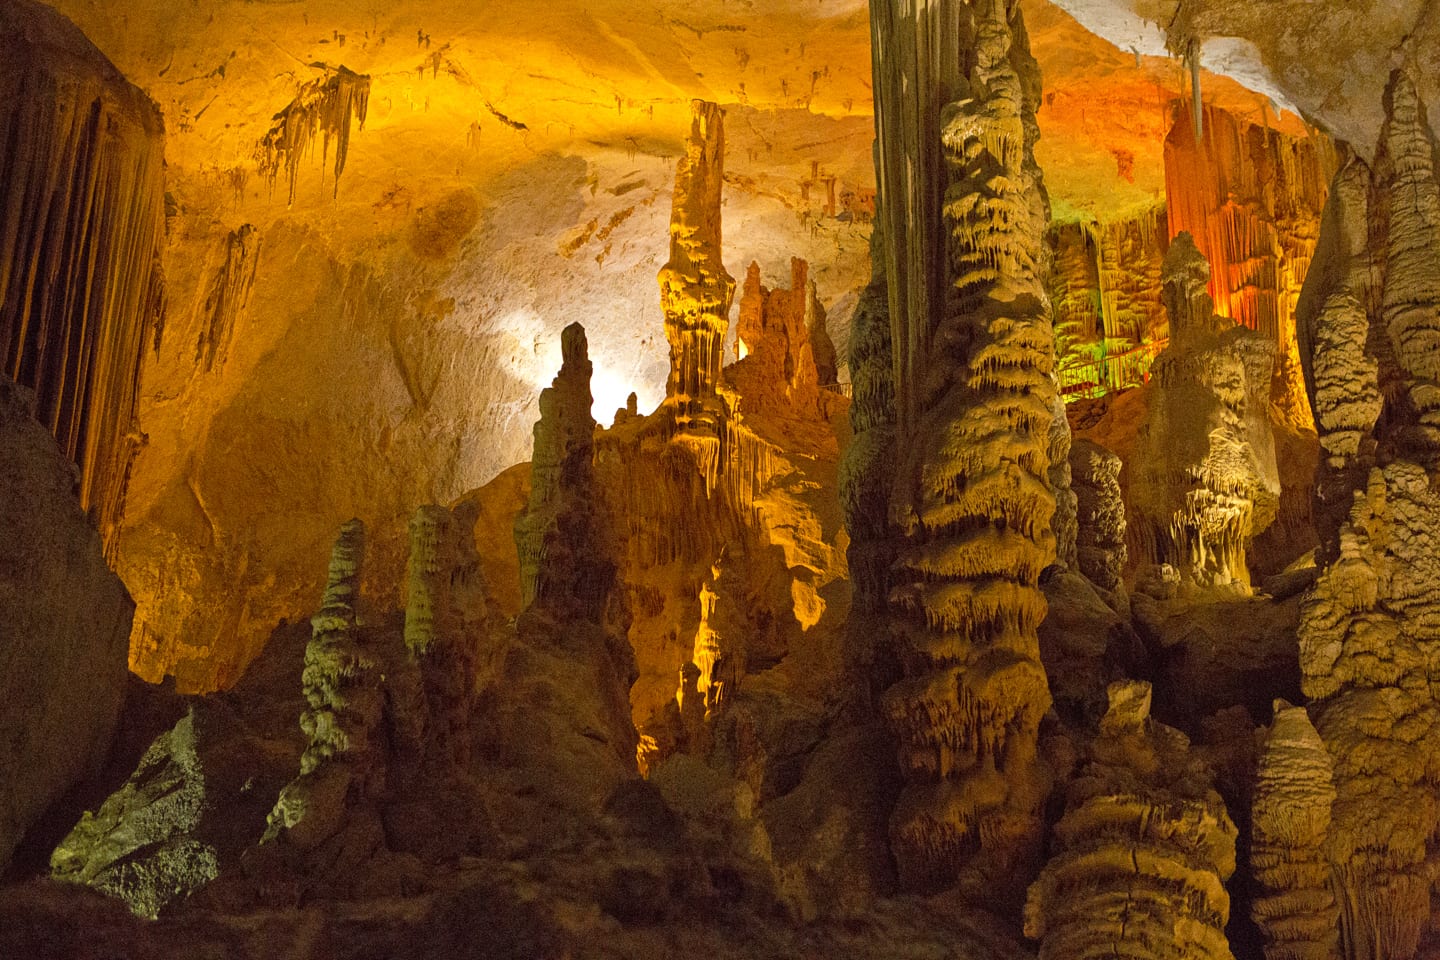 Linville Caverns: Journey inside a Mountain